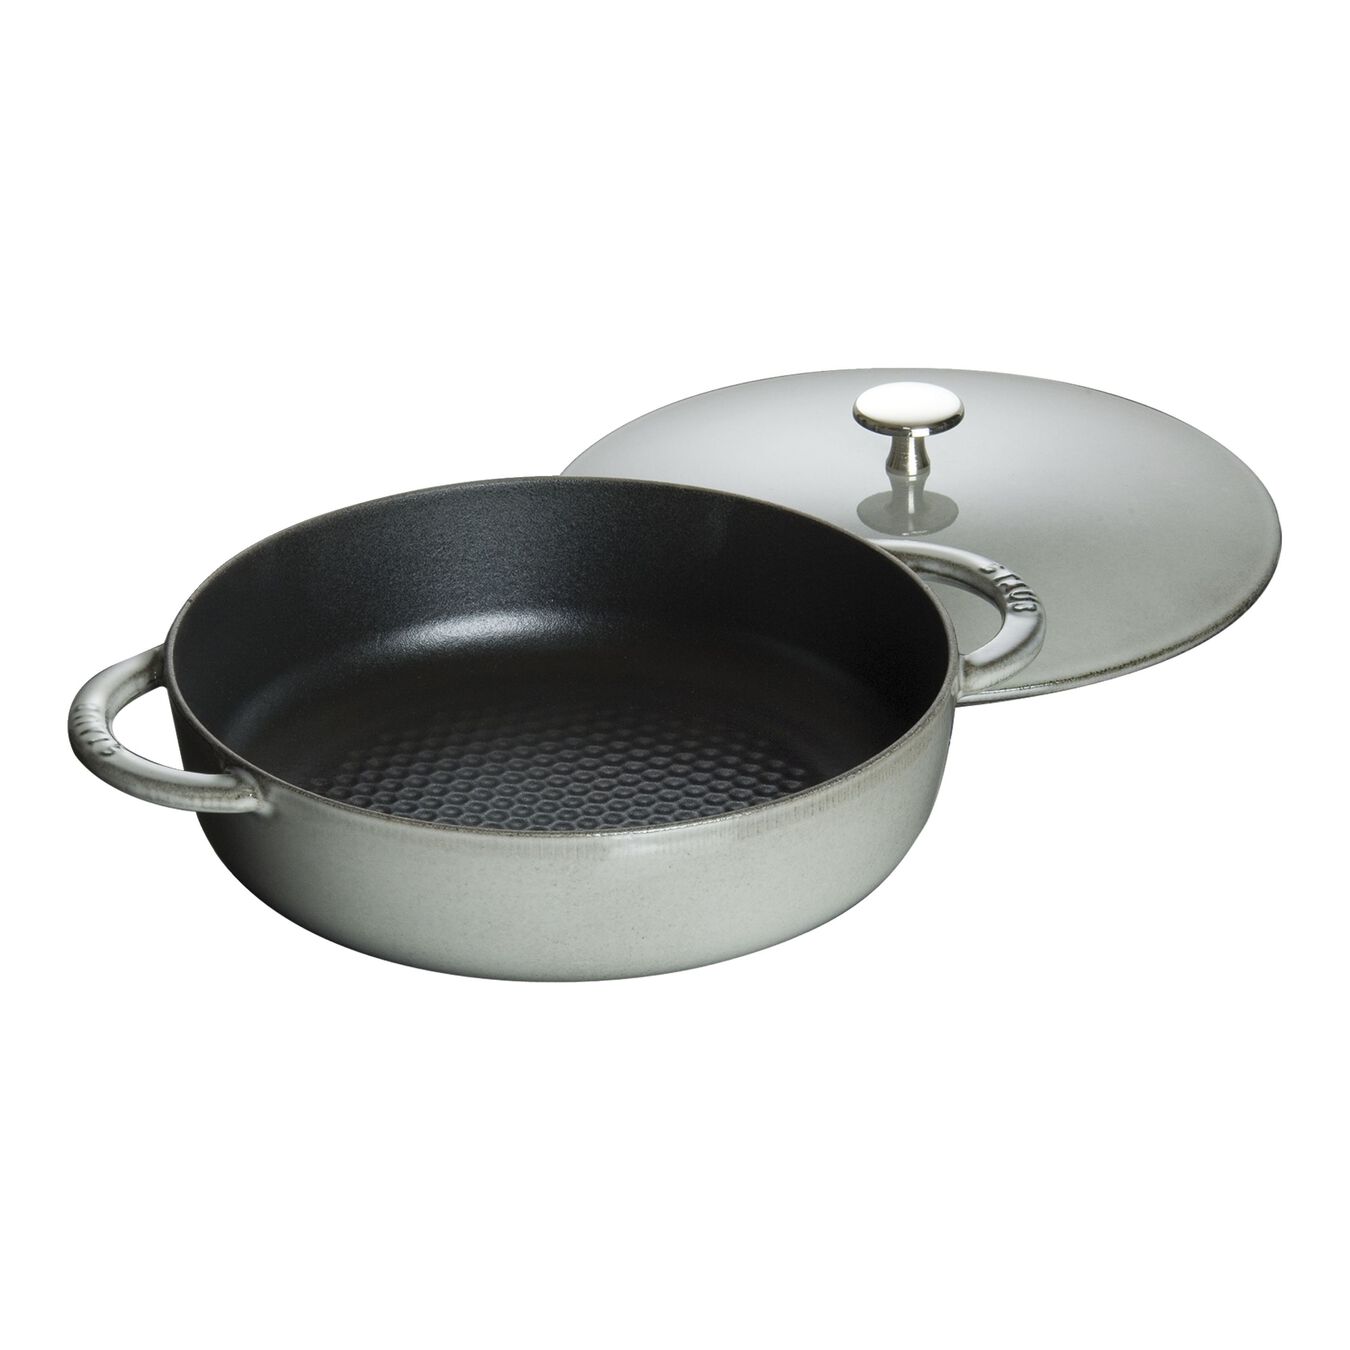 2.5 l cast iron round Saute pan, graphite-grey - Visual Imperfections,,large 1